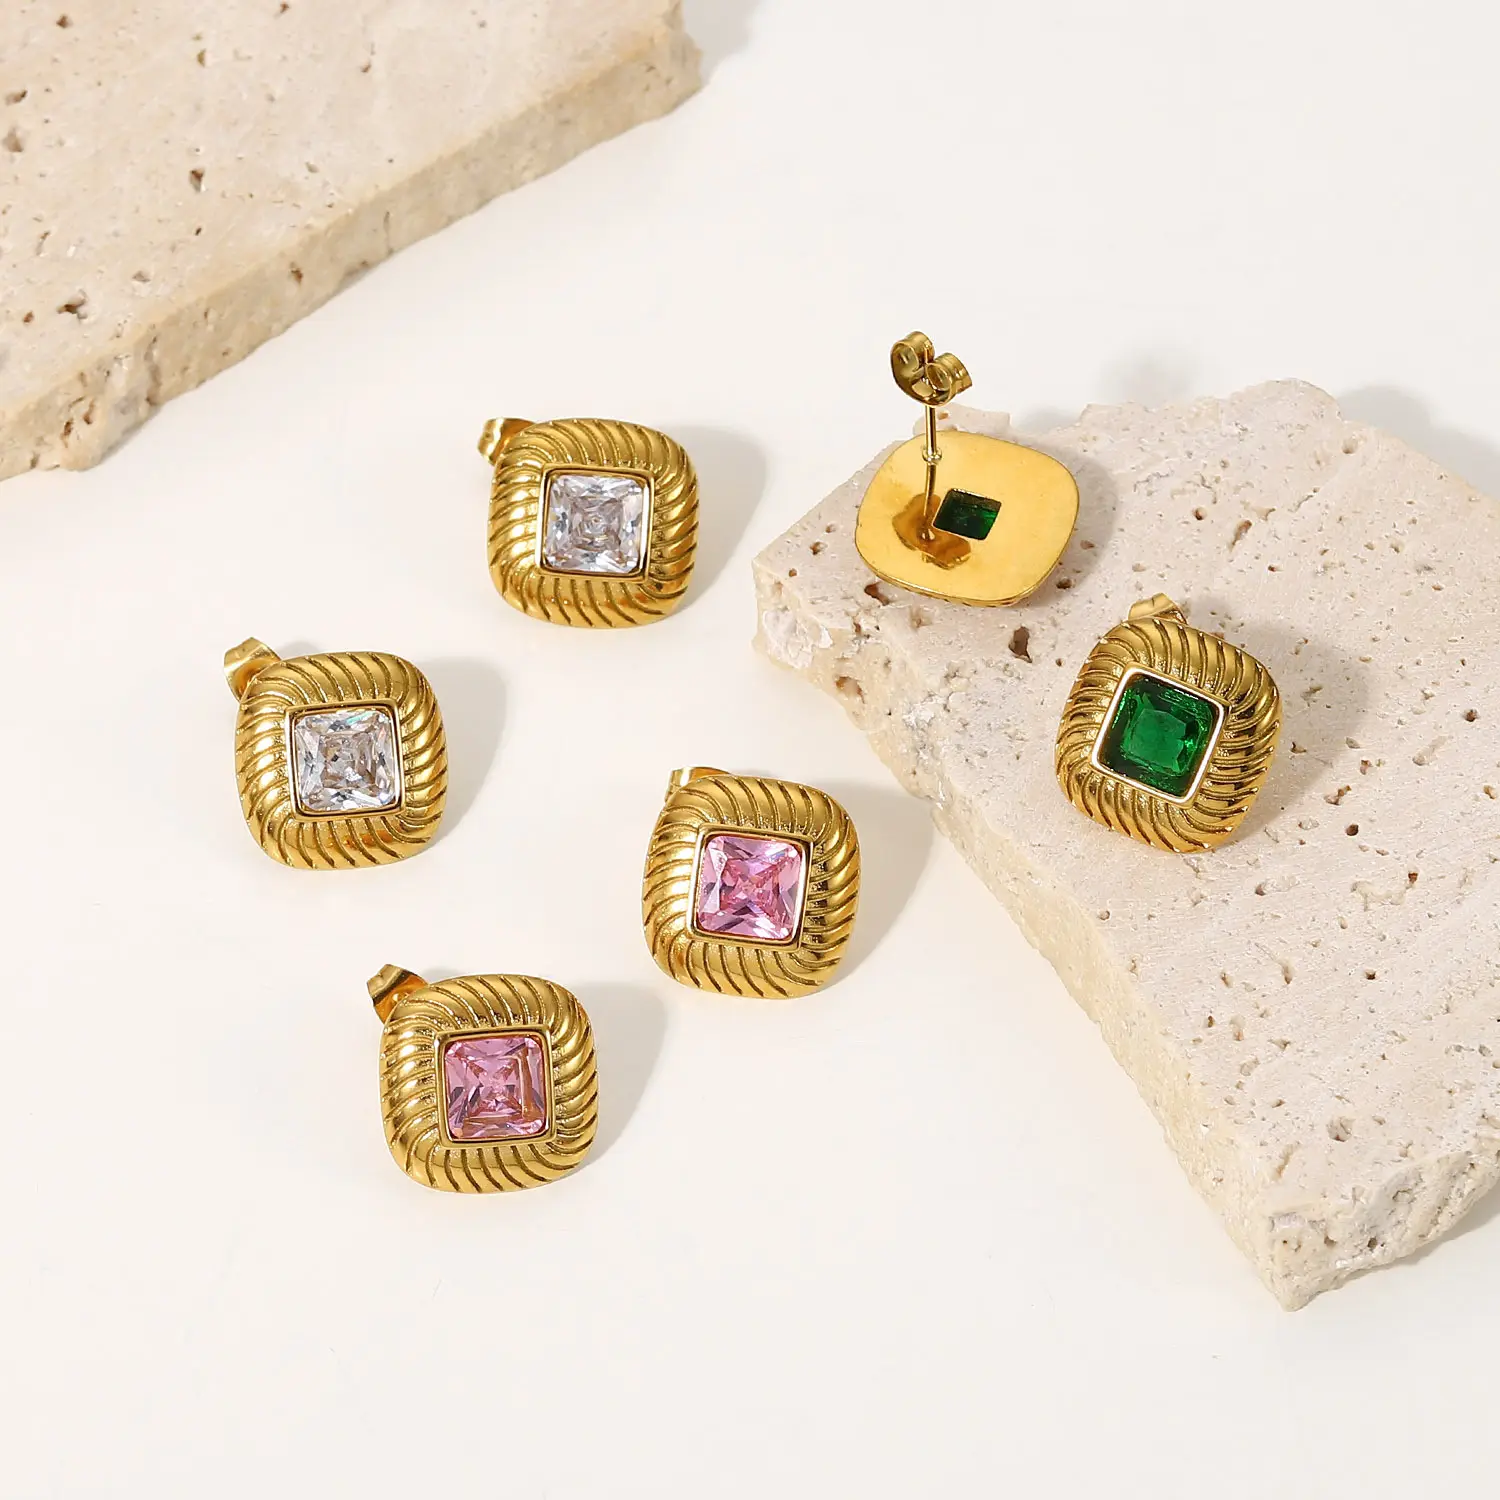 18K Gold Plated Square Button Colored Zircon Stud Earrings Stainless Steel Green/White/Pink Cubic Zirconia Earrings Women